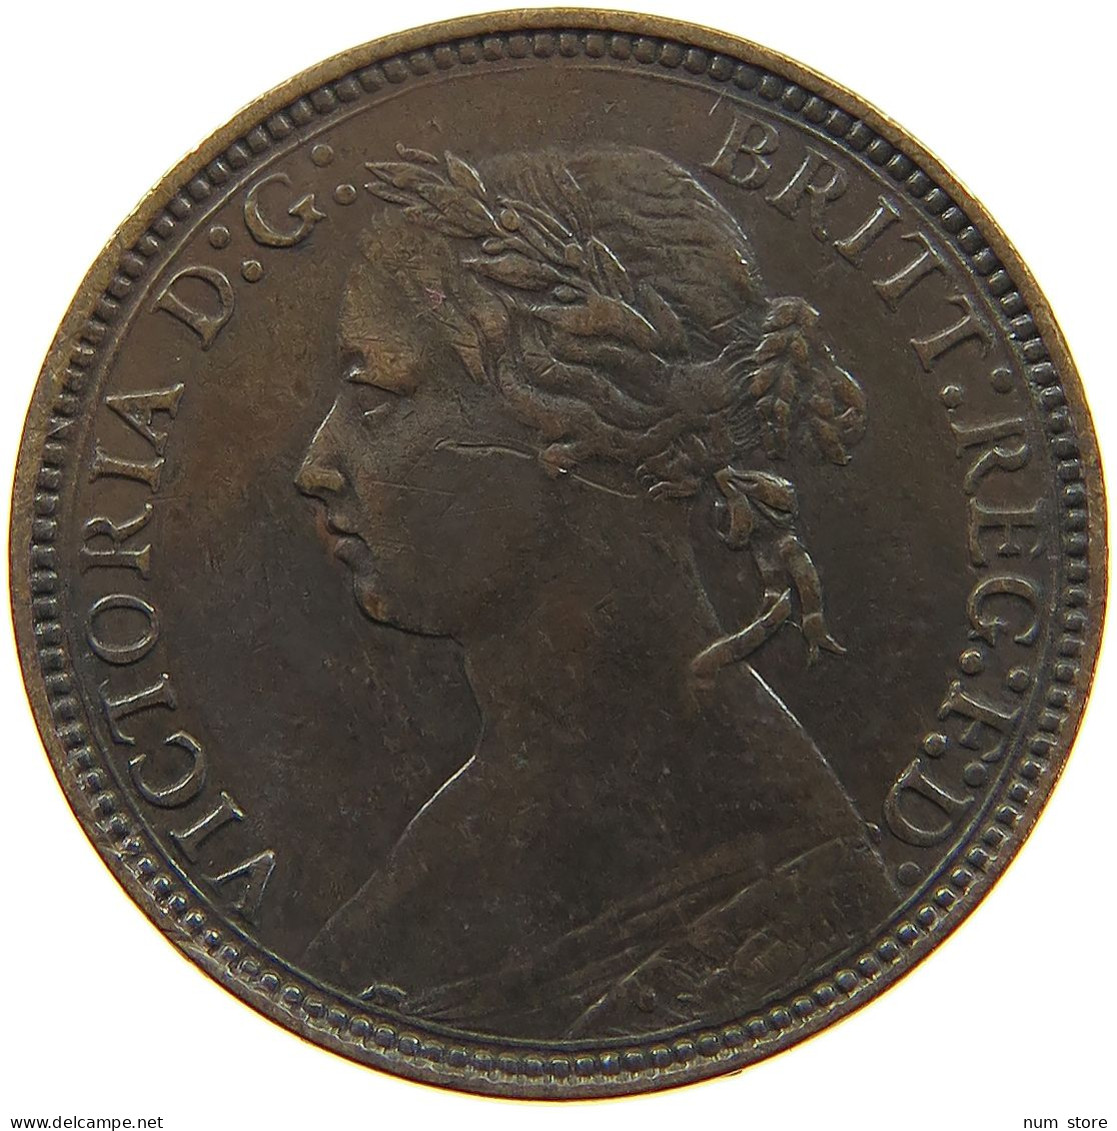 GREAT BRITAIN FARTHING 1875 H Victoria 1837-1901 #a058 0117 - B. 1 Farthing